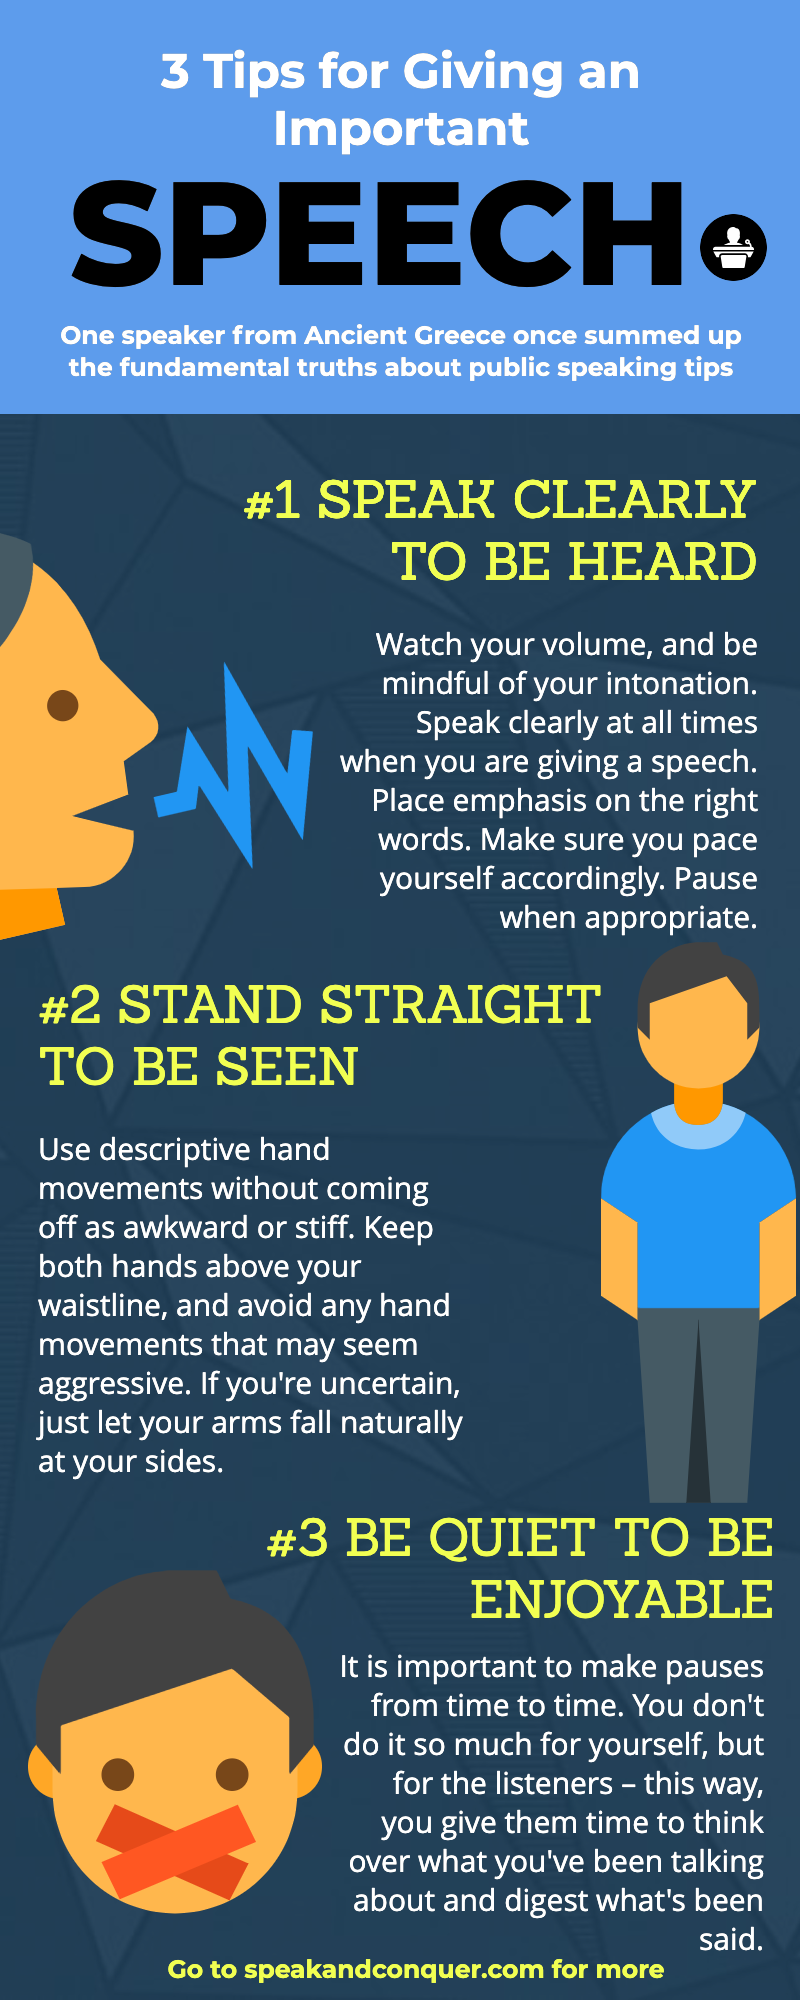 3 Tips for Giving an Important Speech. Public speaking tips and tricks